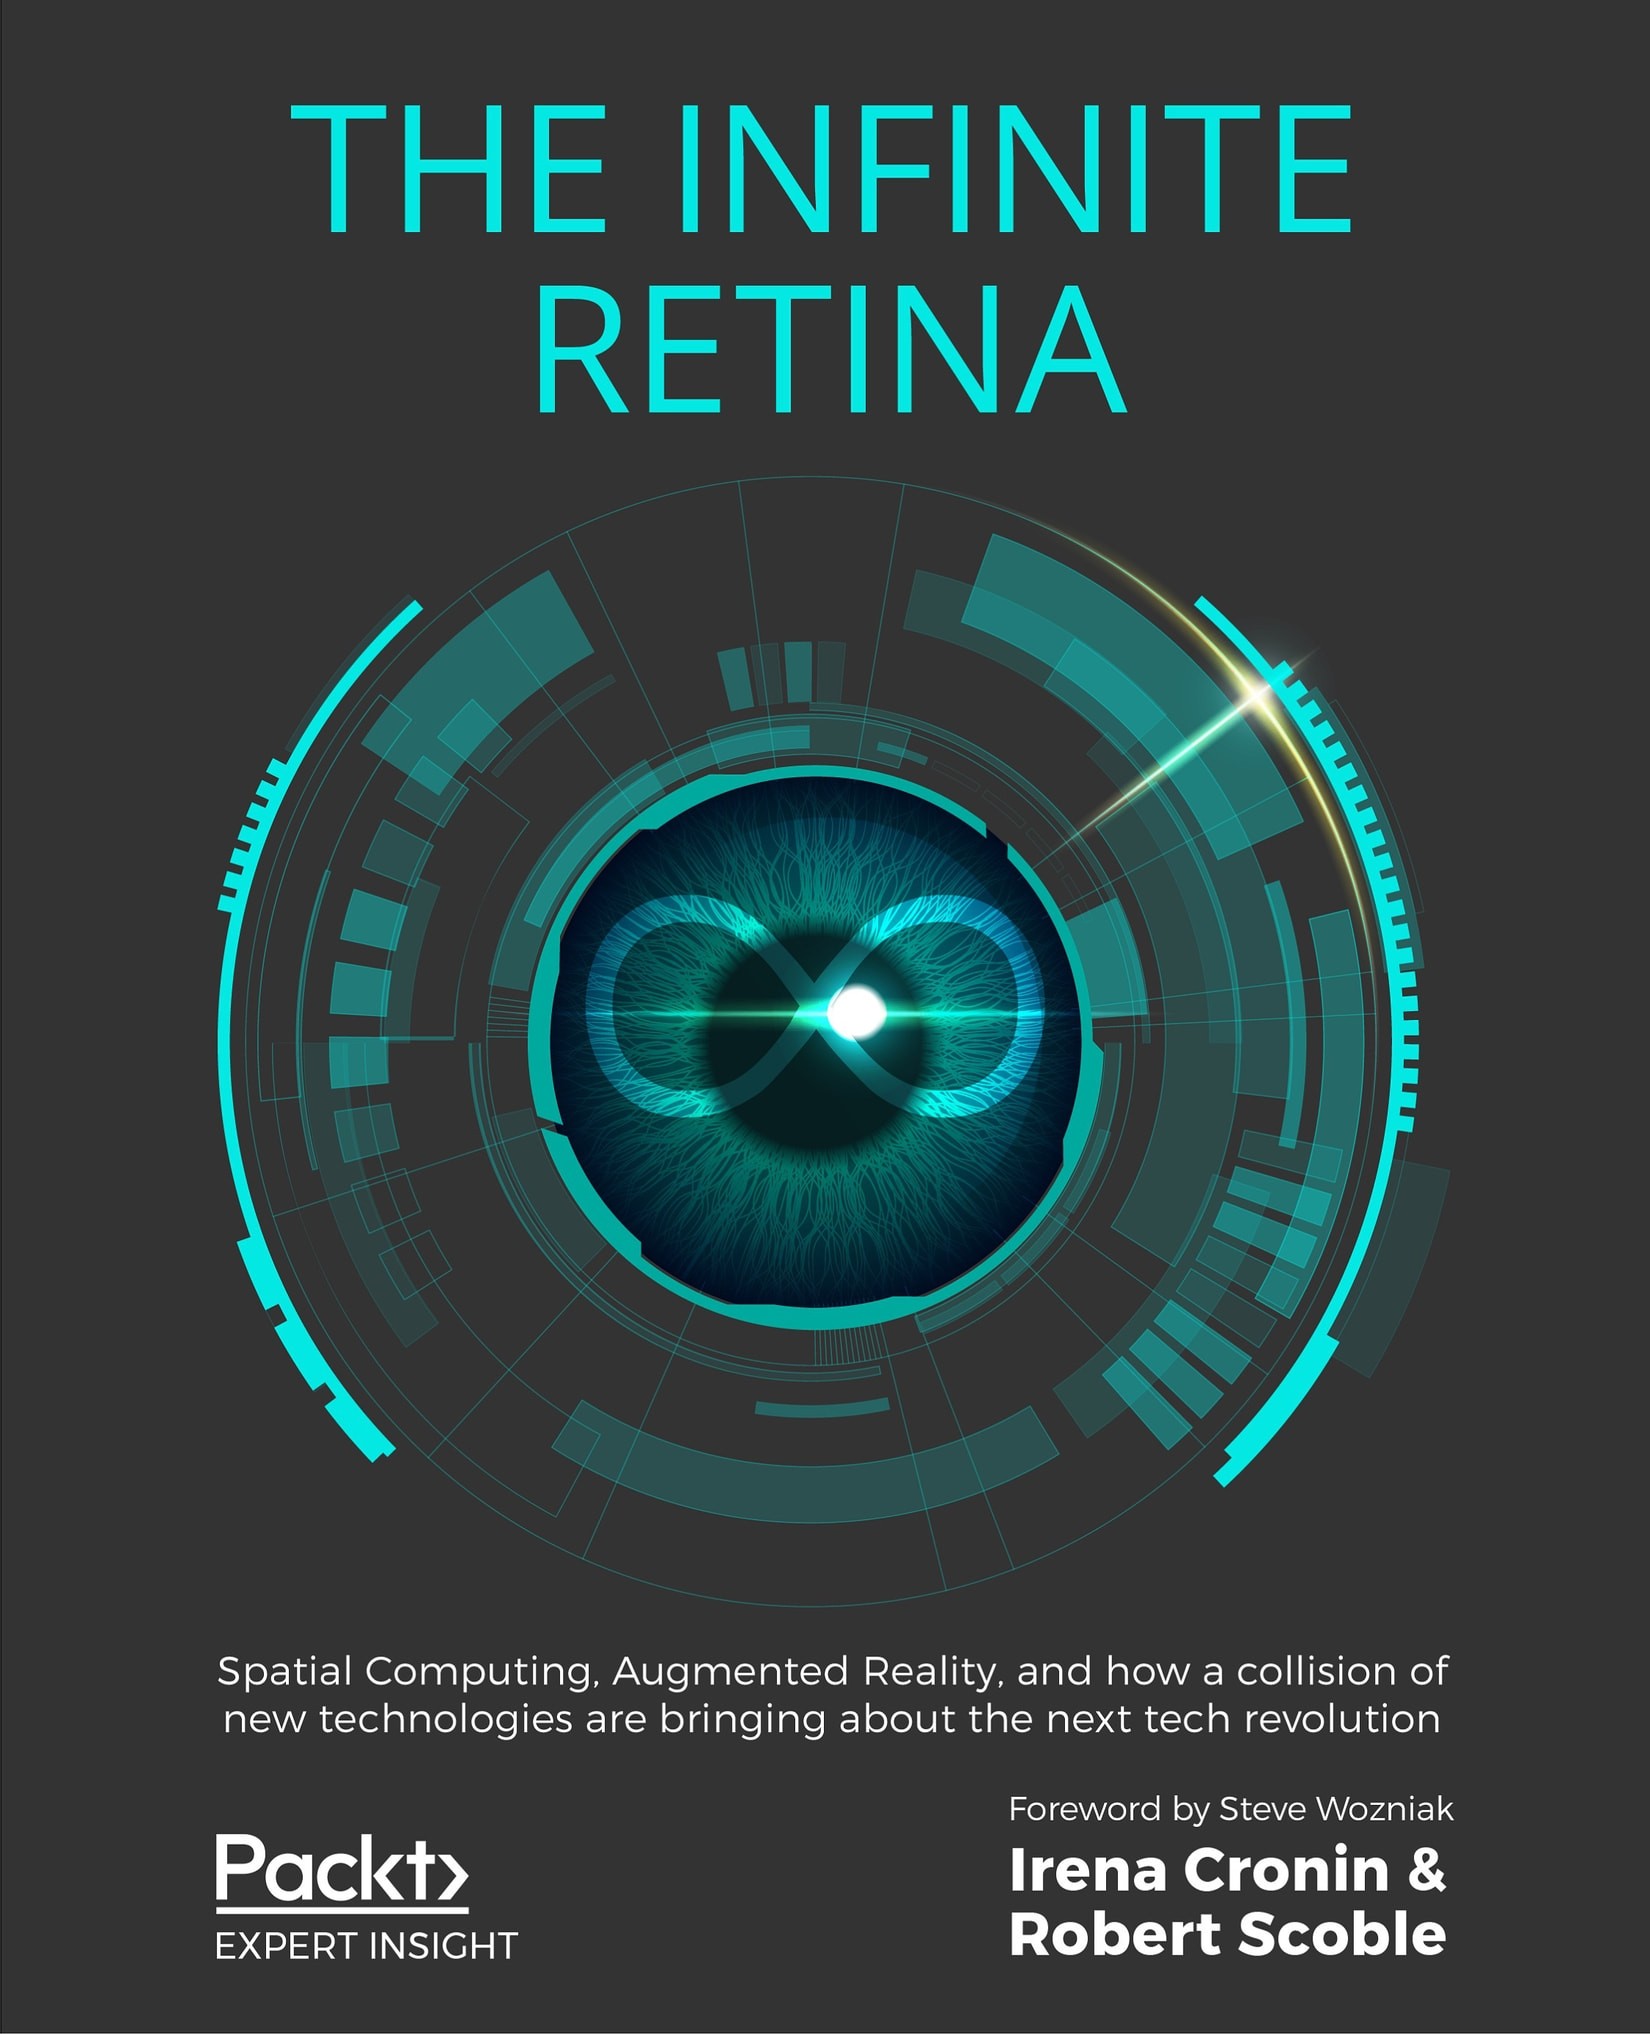 The Infinite Retina: Spatial Computing, Augmented Reality, and How a Collision of New Technologies Are Bringing About the Next Tech Revolution